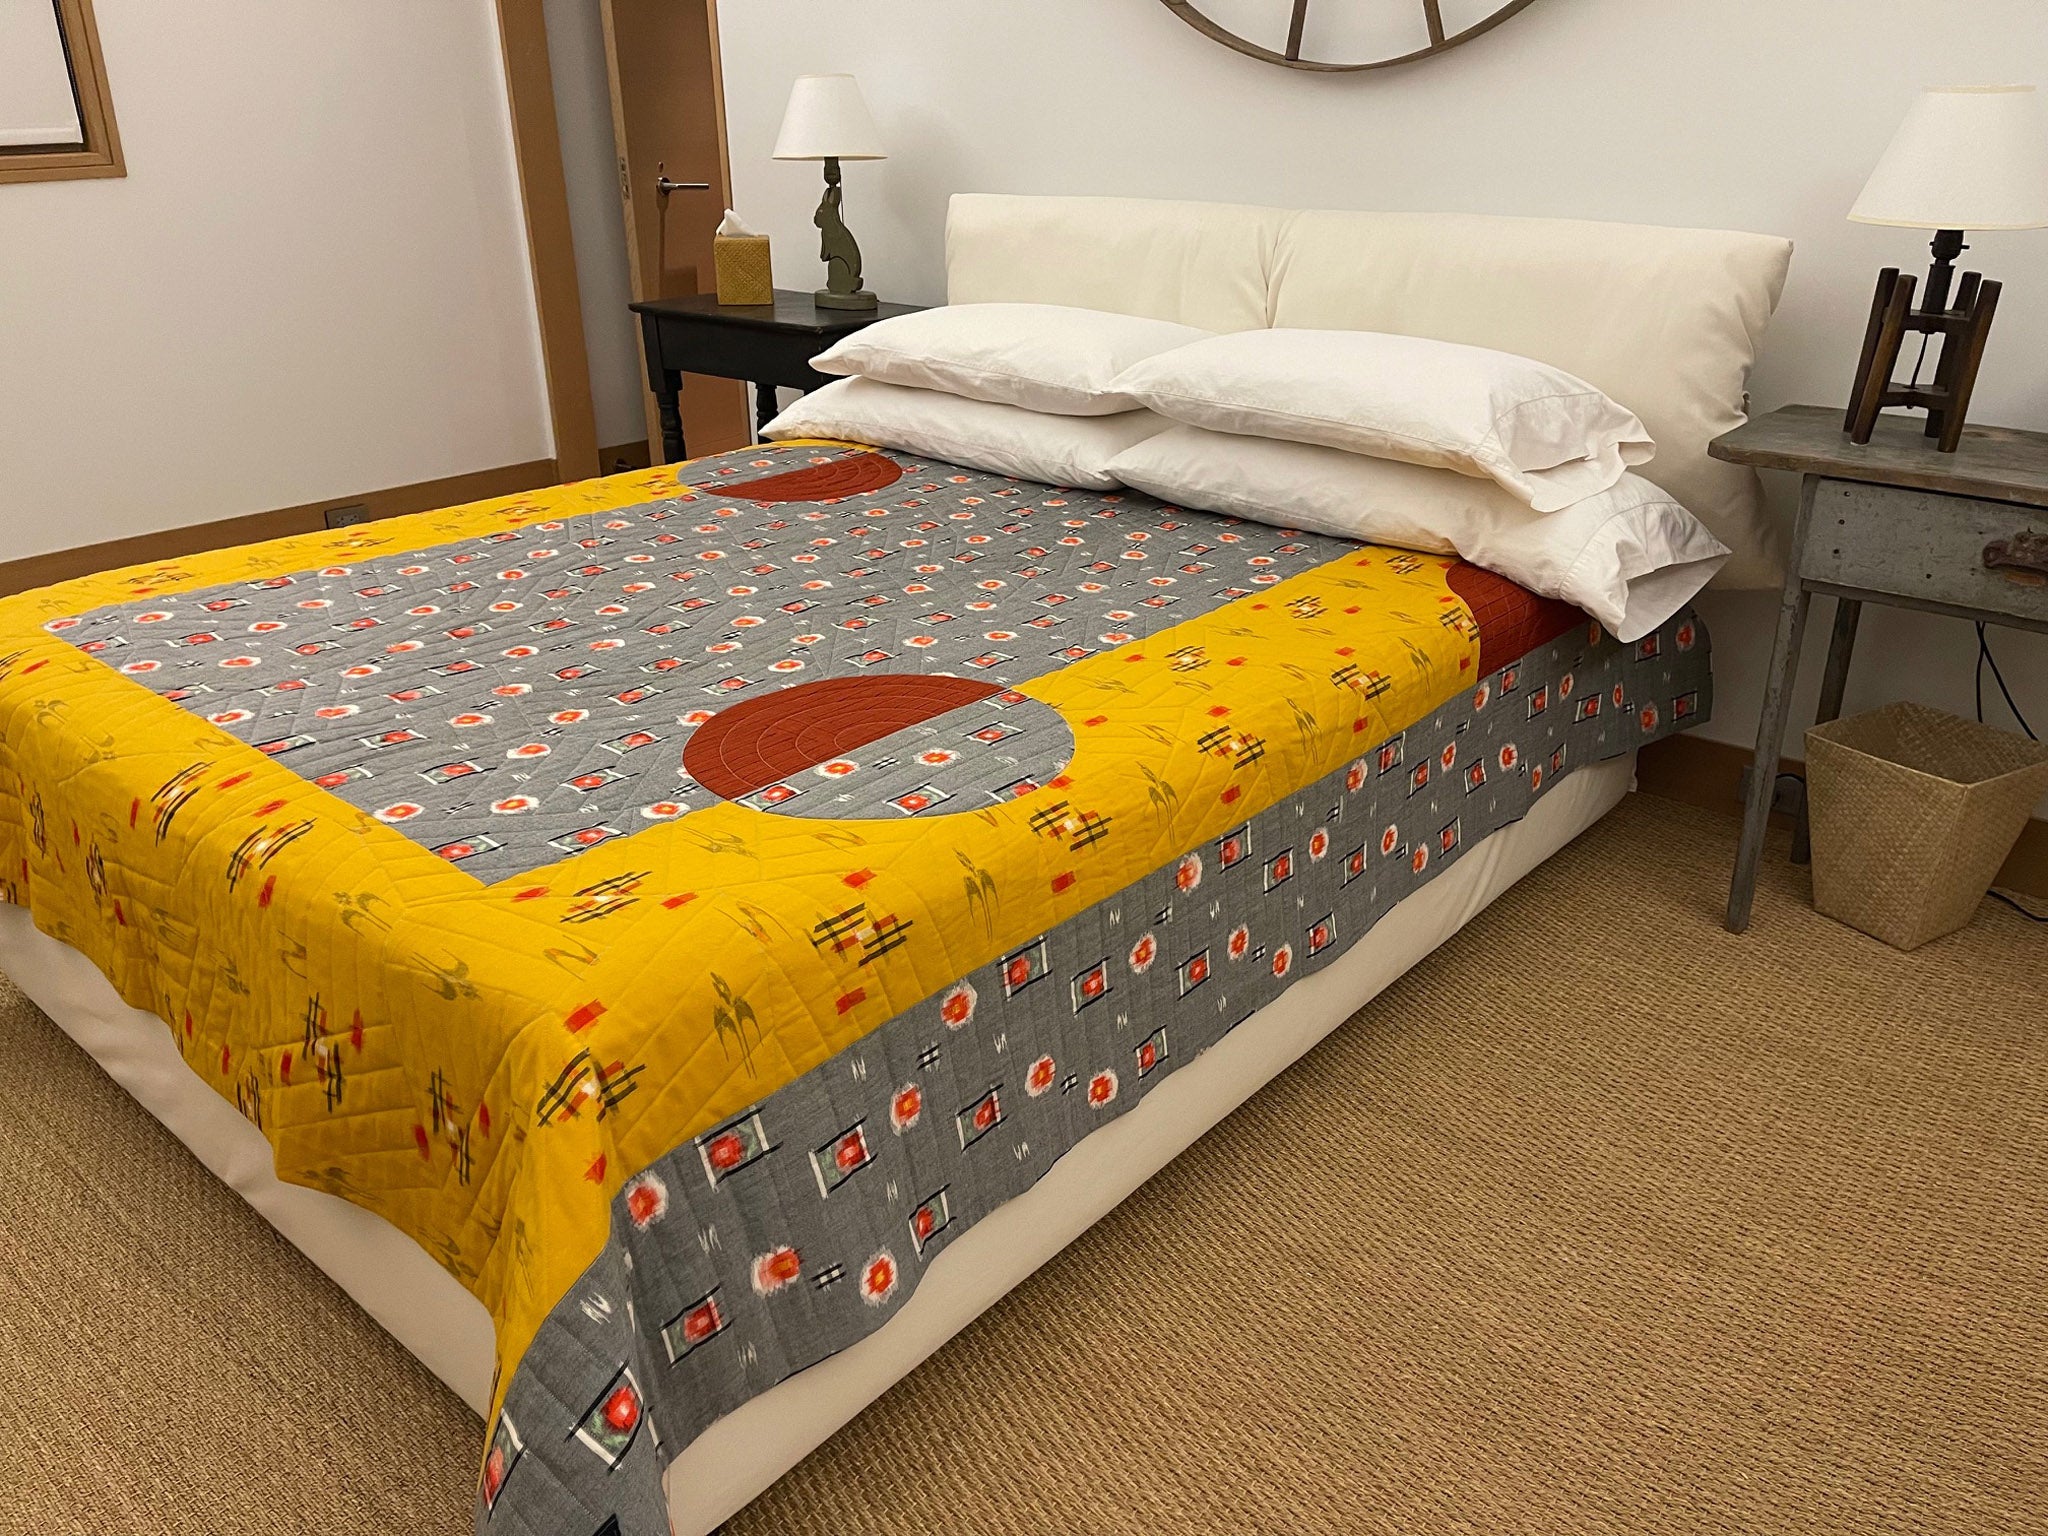 Queen-sized quilt made with ikat-woven kimono wool from Okan Arts